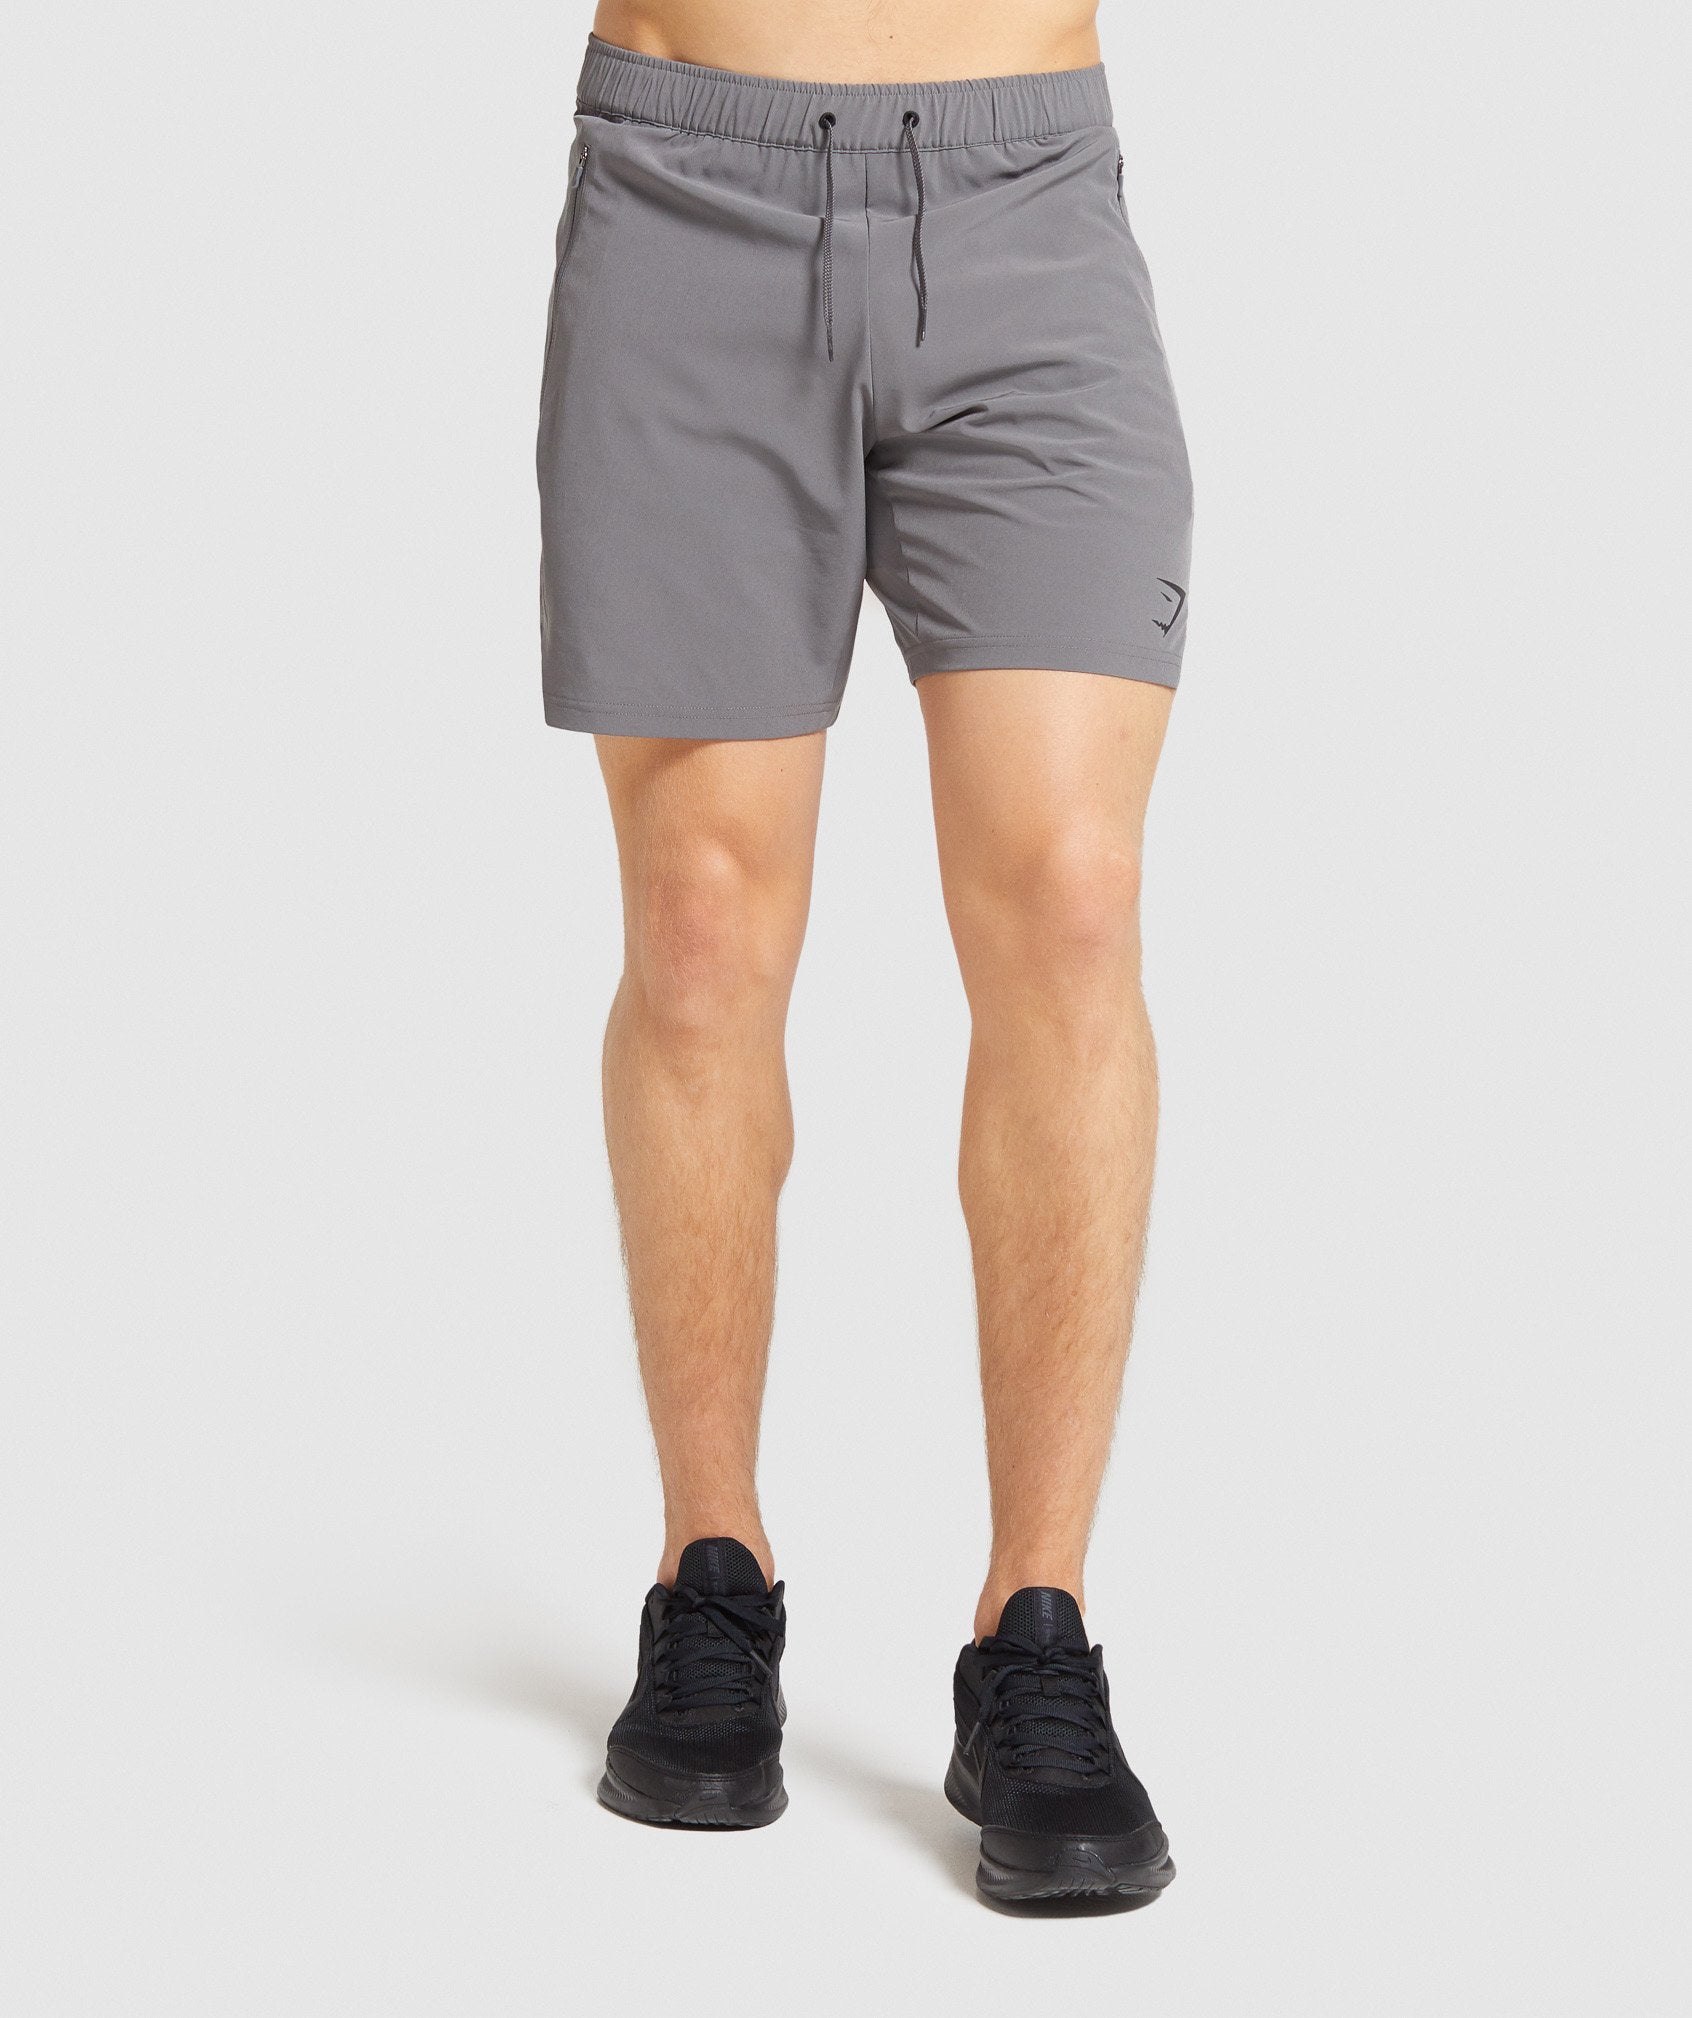 Element Hiit 7" Shorts in Grey - view 1